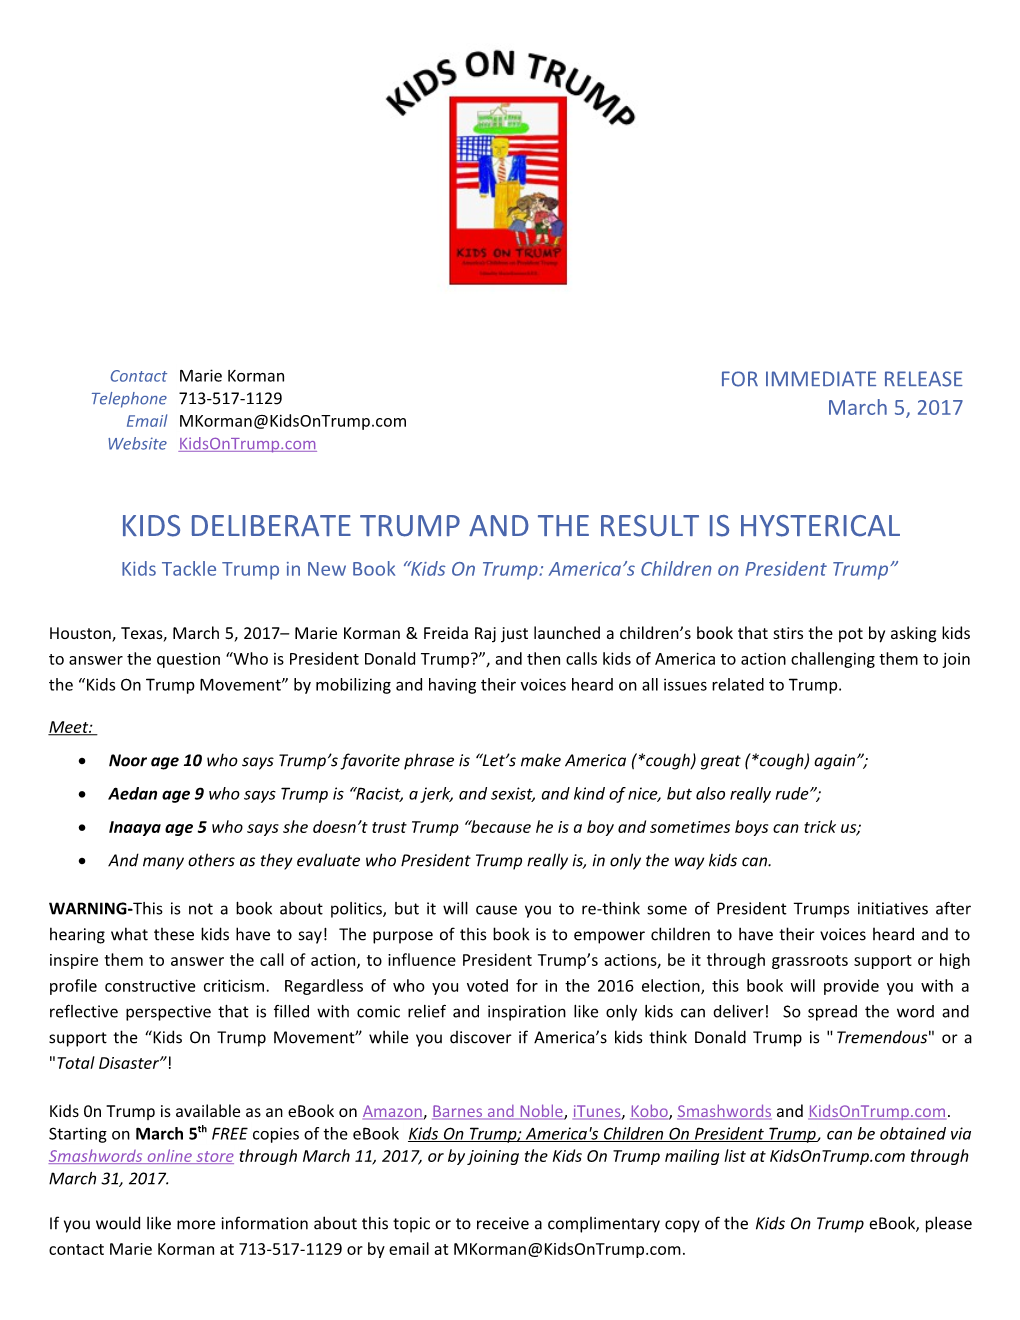 KIDS DELIBERATE TRUMP and the RESULT IS HYSTERICAL